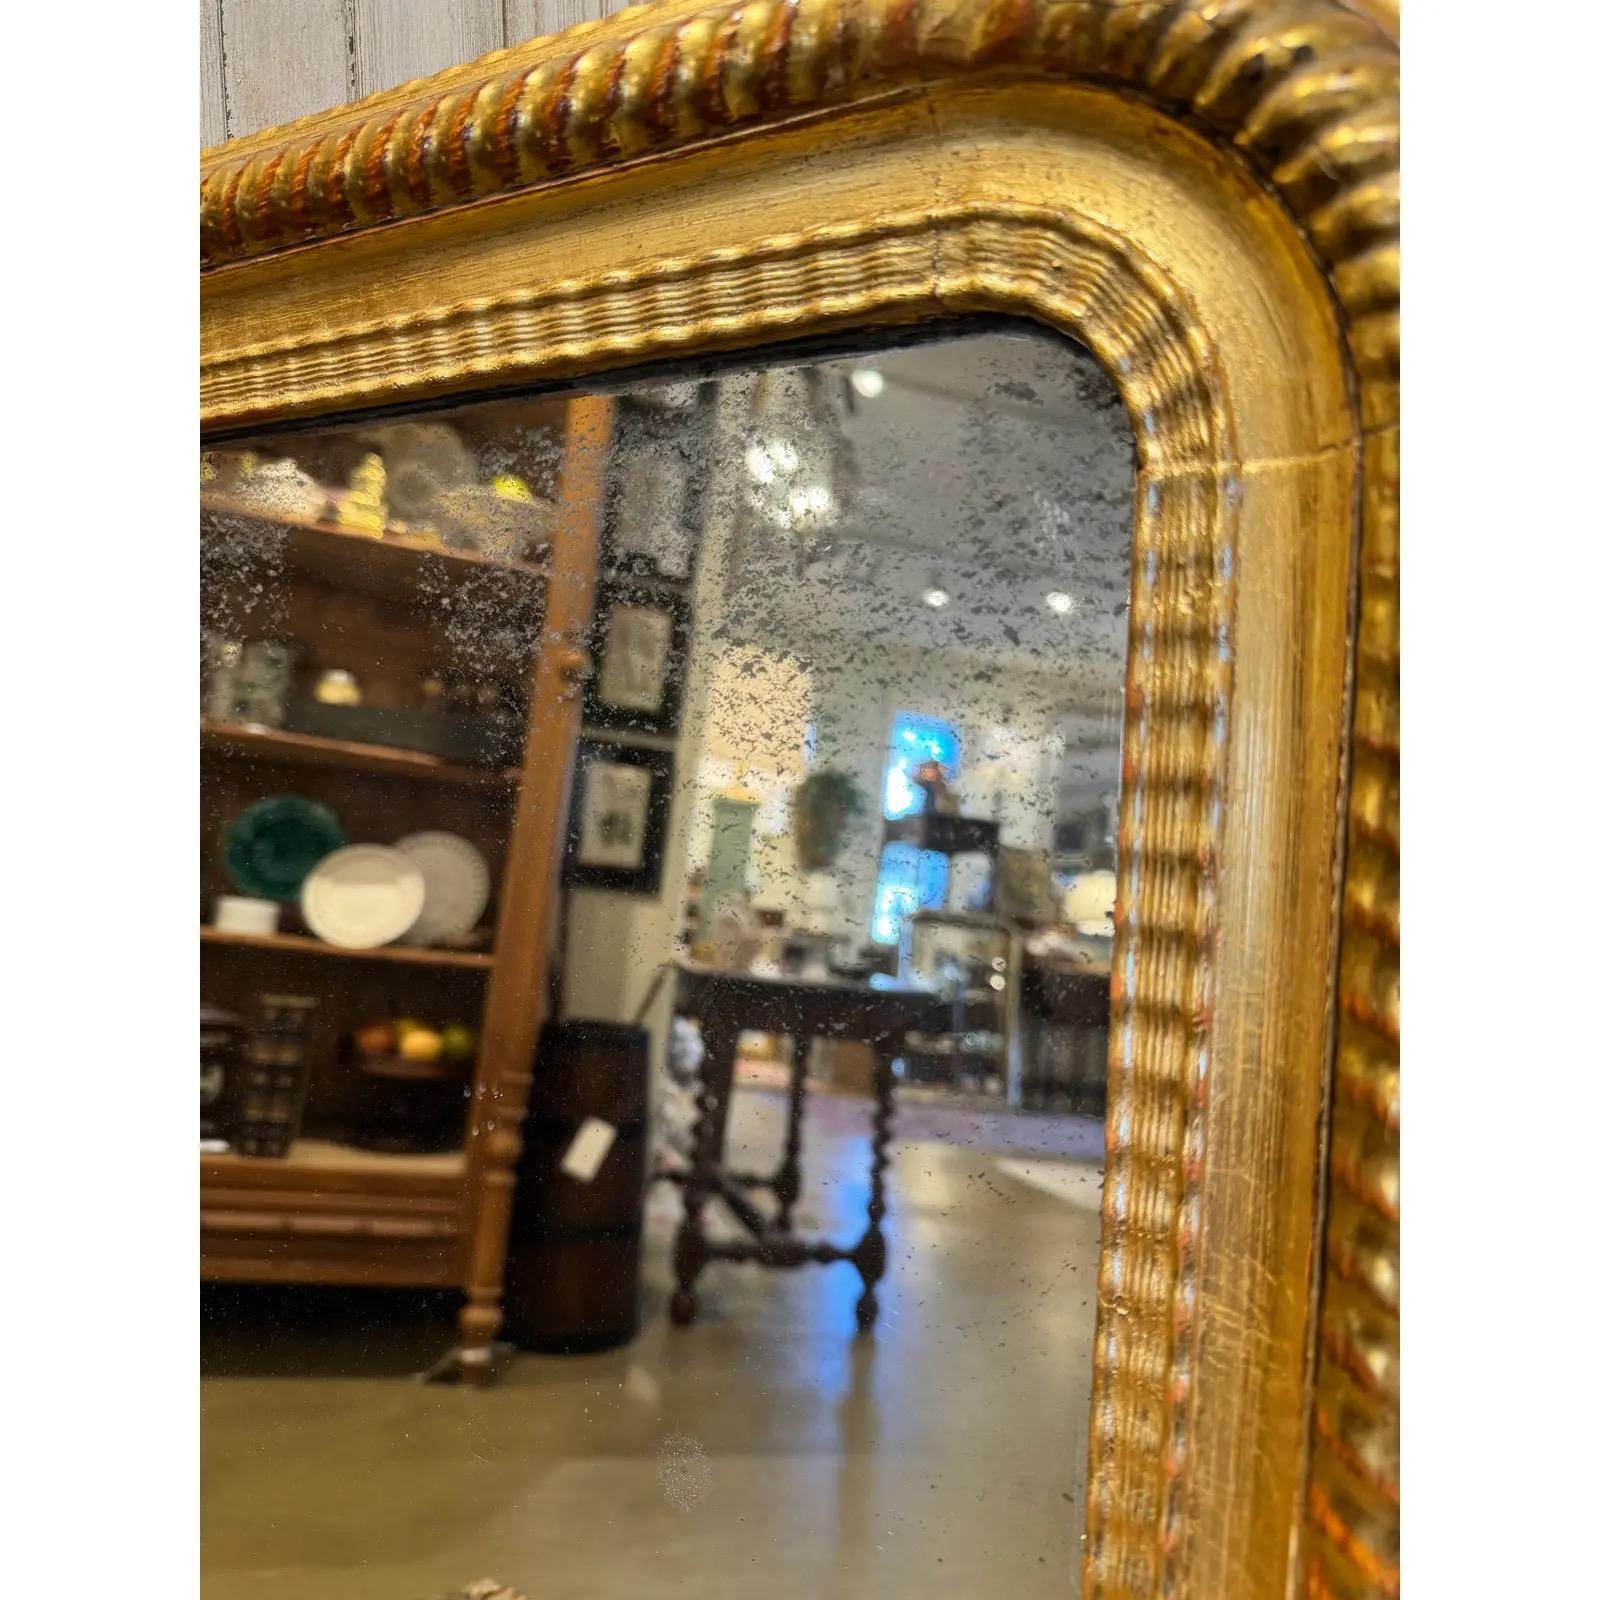 This exquisite Antique Louis Philippe Mirror, adorned with a gilded finish, effortlessly brings timeless charm to any space. Its ornate banded detailing and classic design make it a captivating centerpiece, reflecting both style and history in a